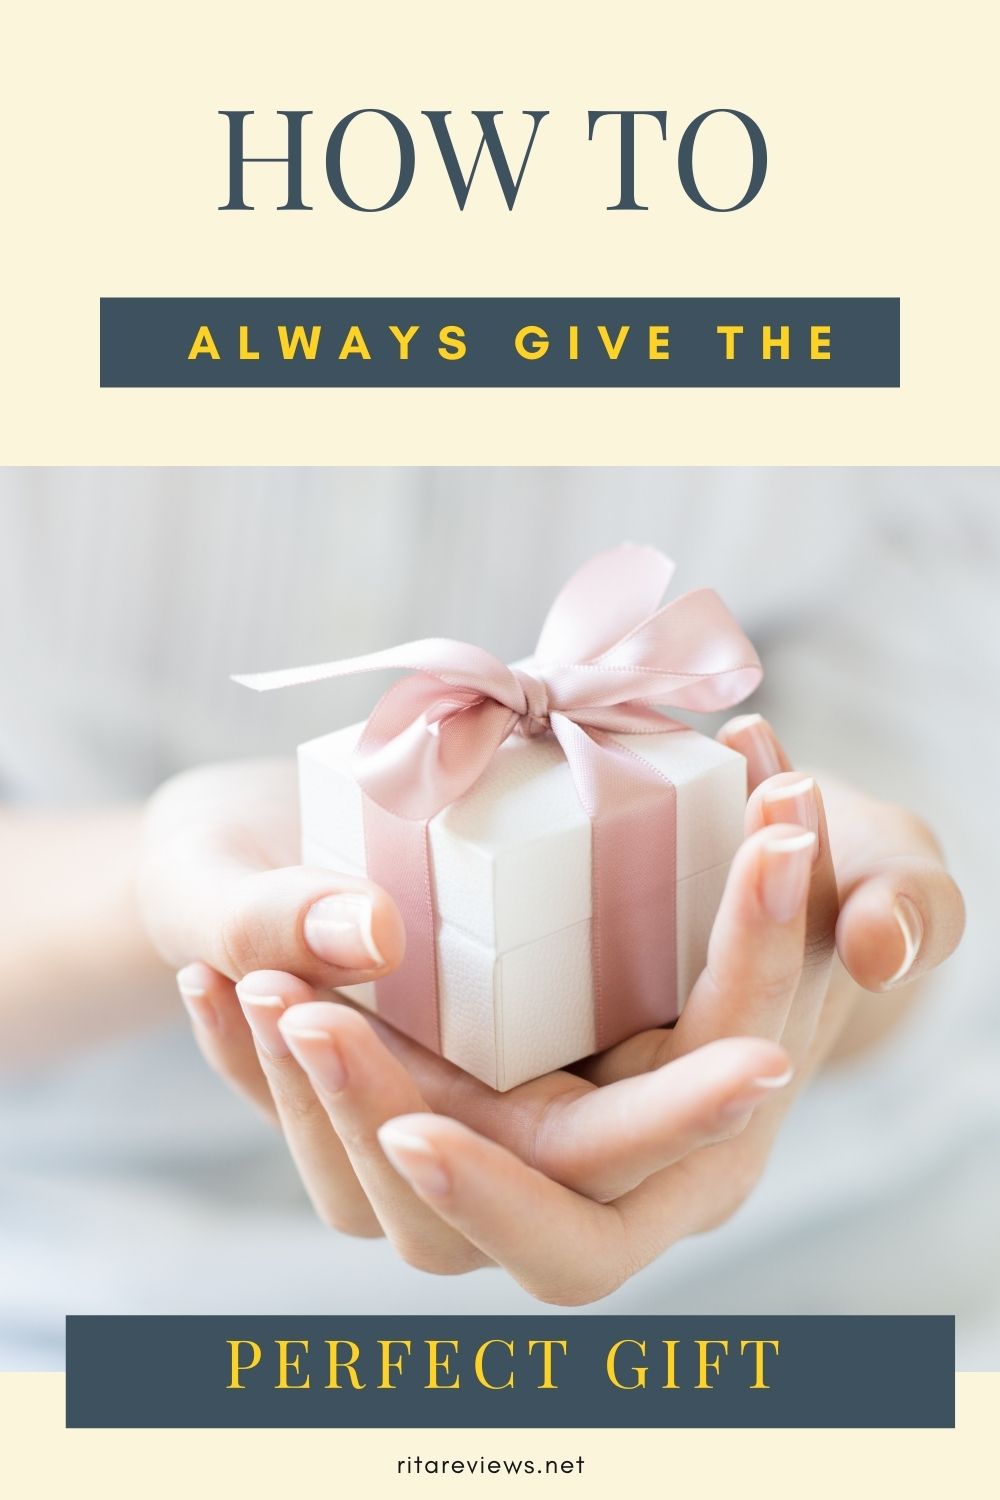 How to Always Give the Perfect Gift